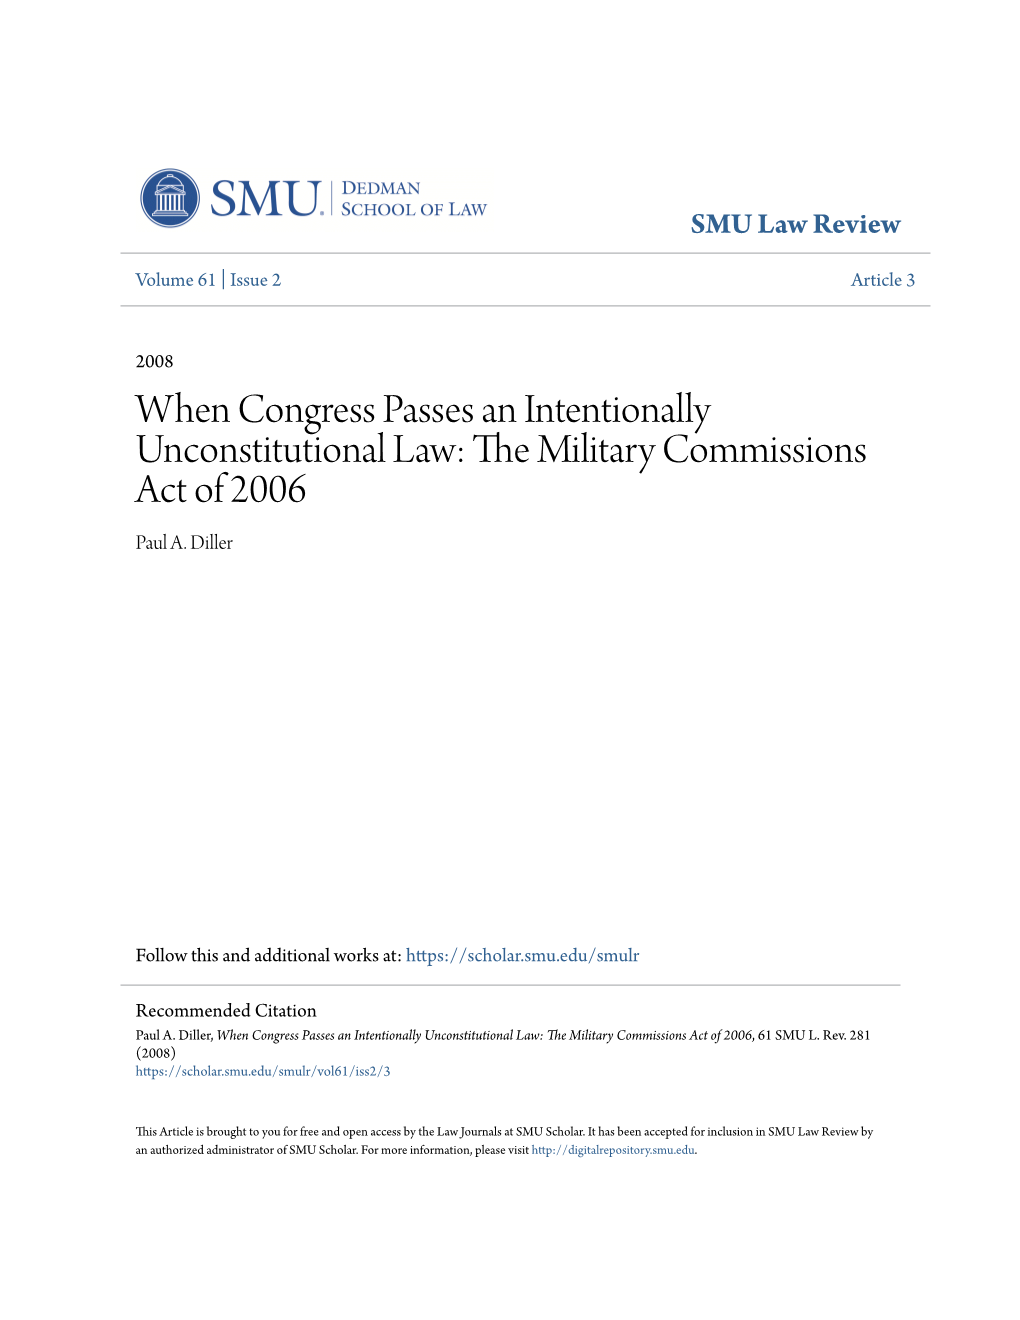 When Congress Passes an Intentionally Unconstitutional Law: the Im Litary Commissions Act of 2006 Paul A